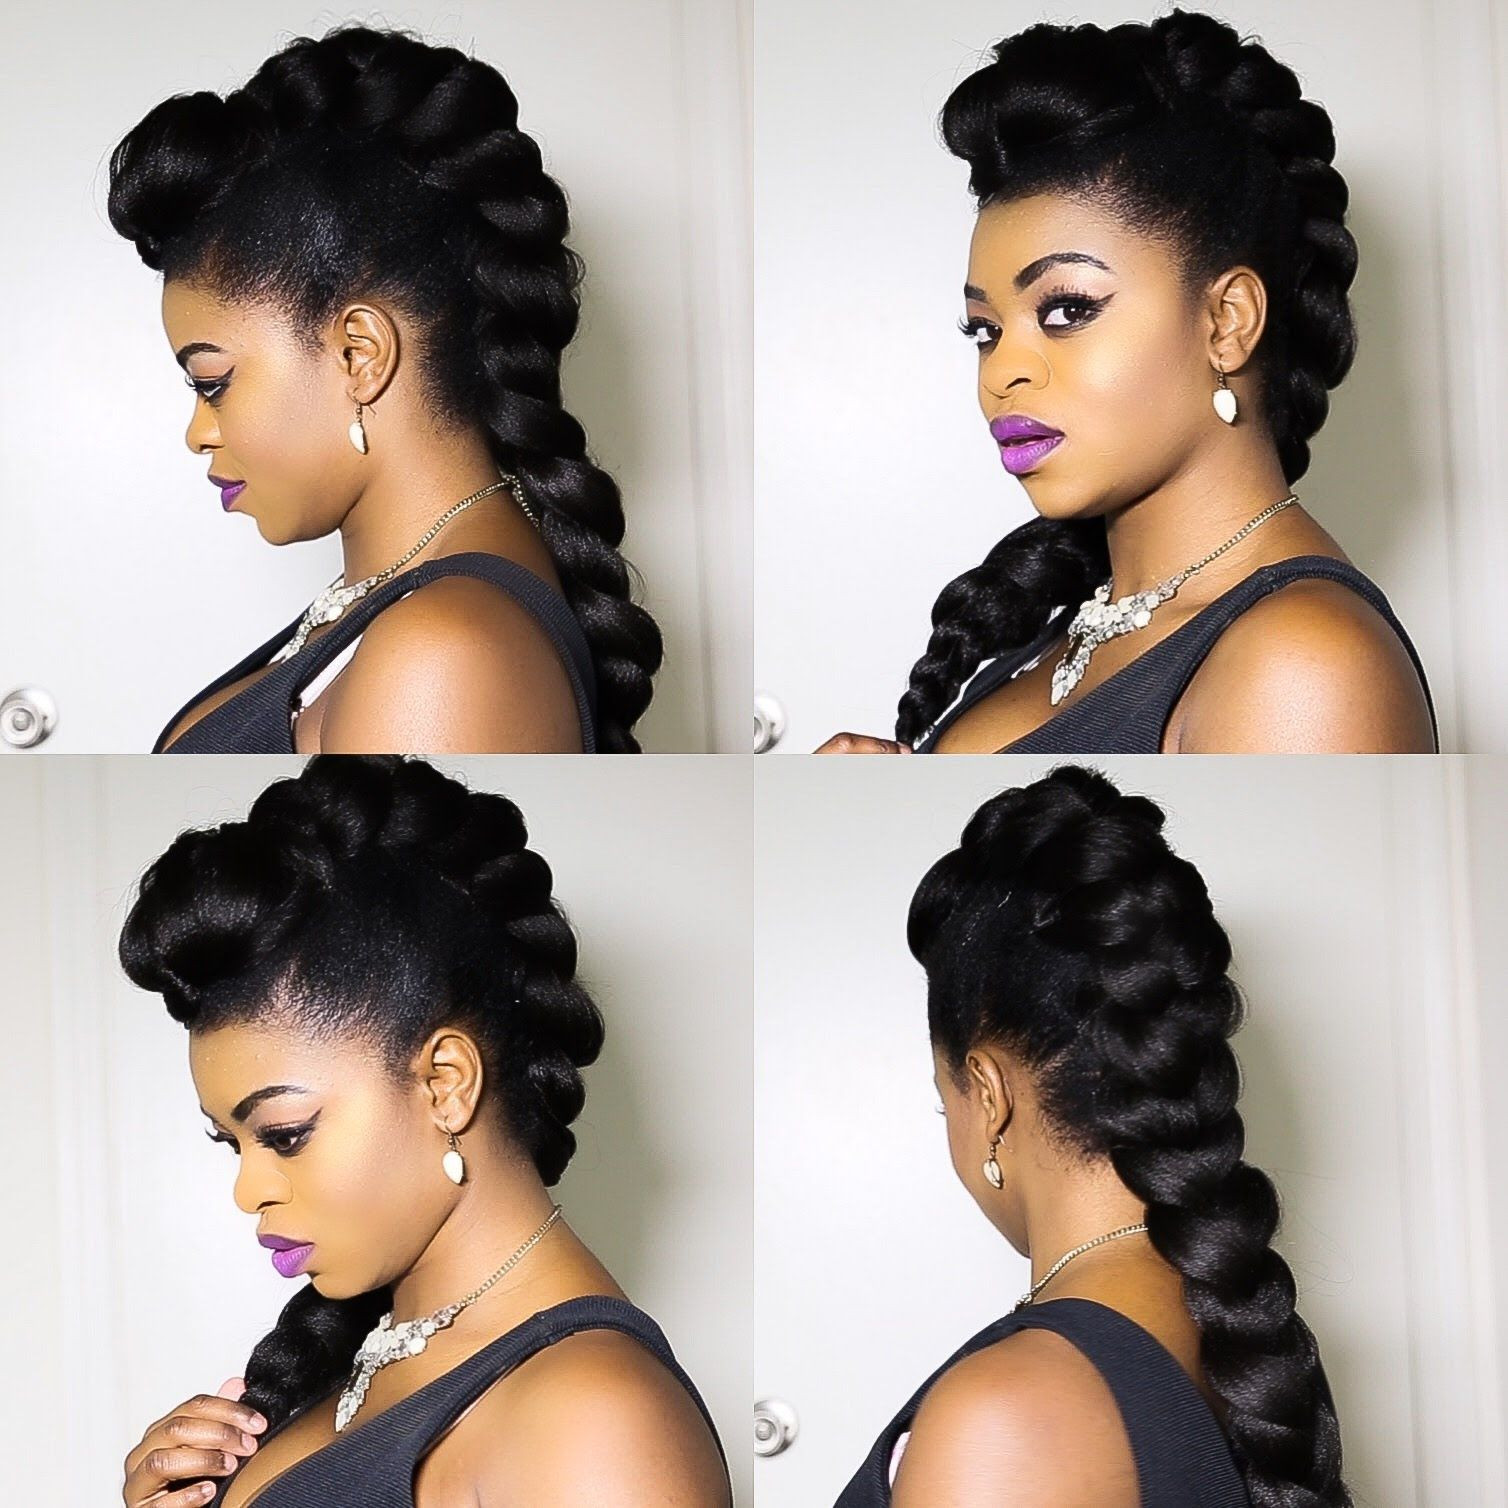 Natural Braided Mohawk Hairstyles
 Faux Braided Mohawk on Natural Hair